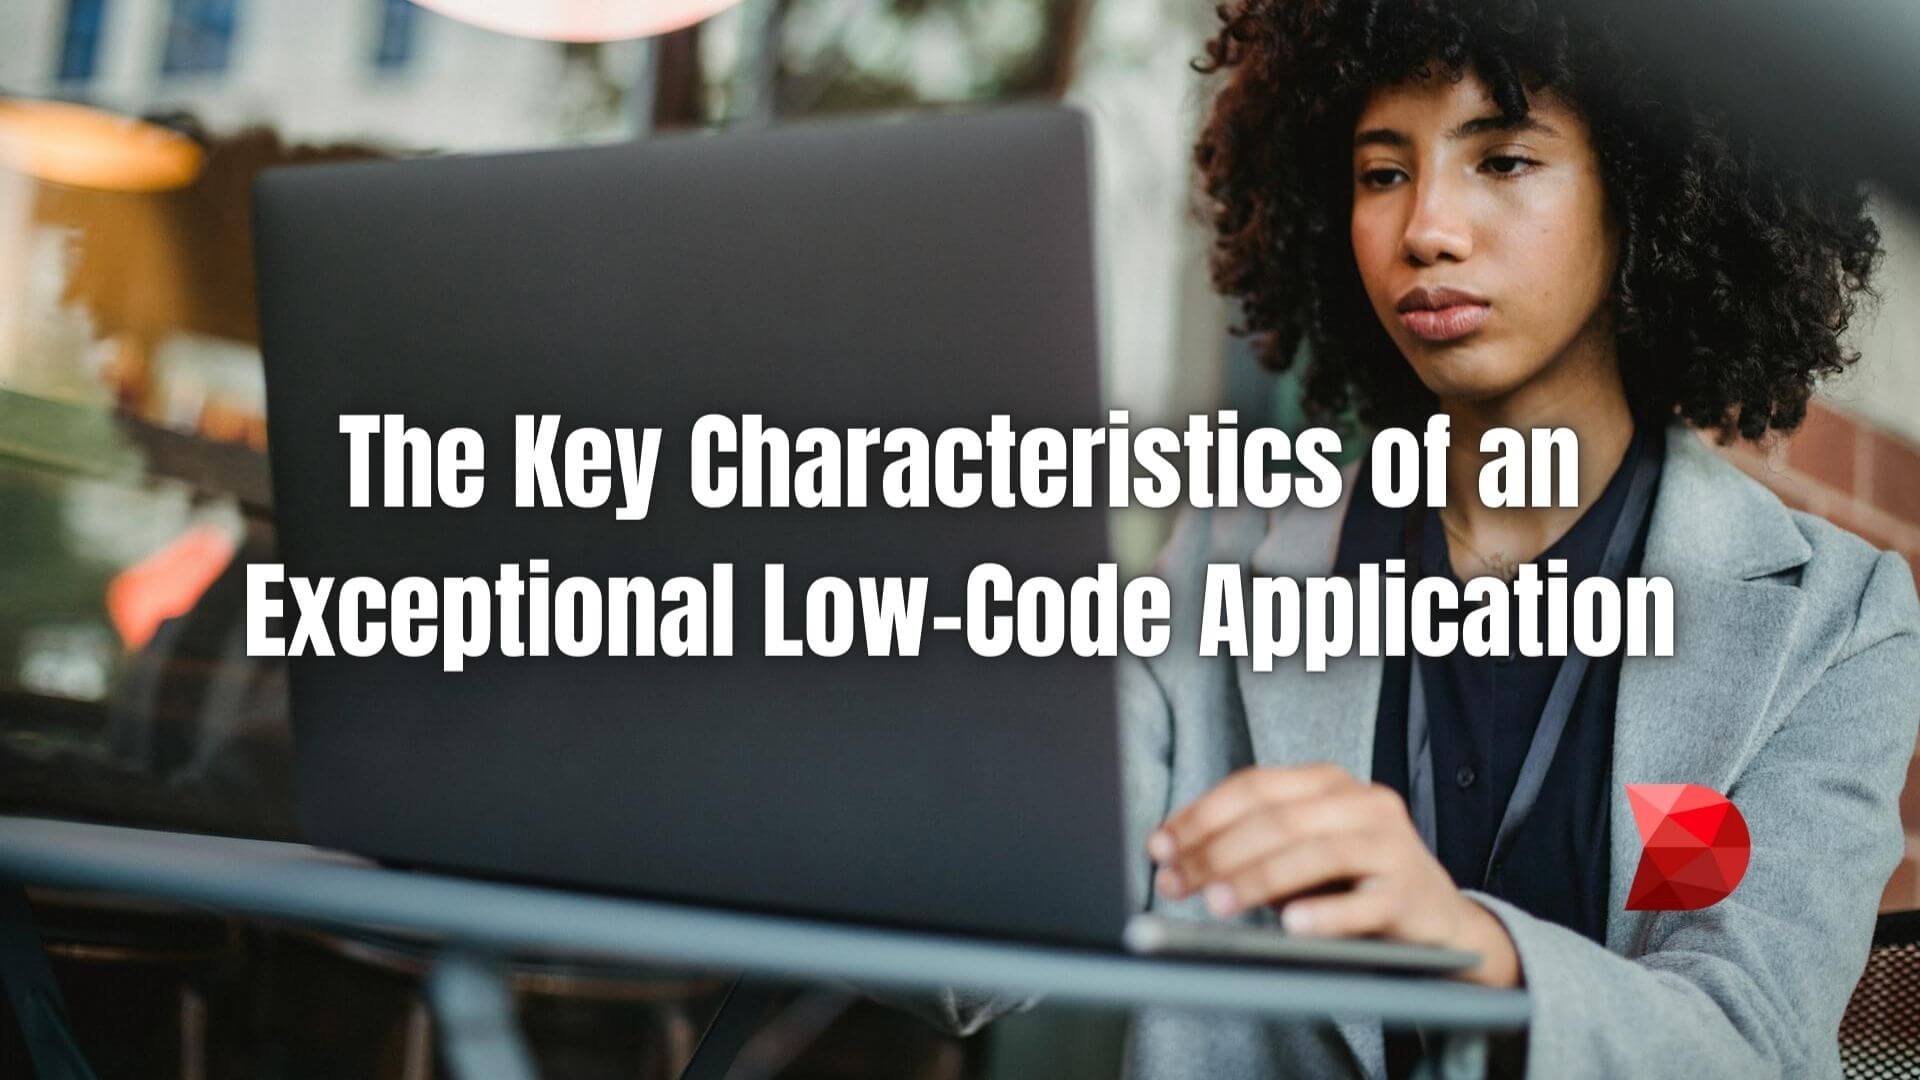 Unlock the potential of low code with our guide! Click here to learn the essential traits of an exceptional low-code application effortlessly.